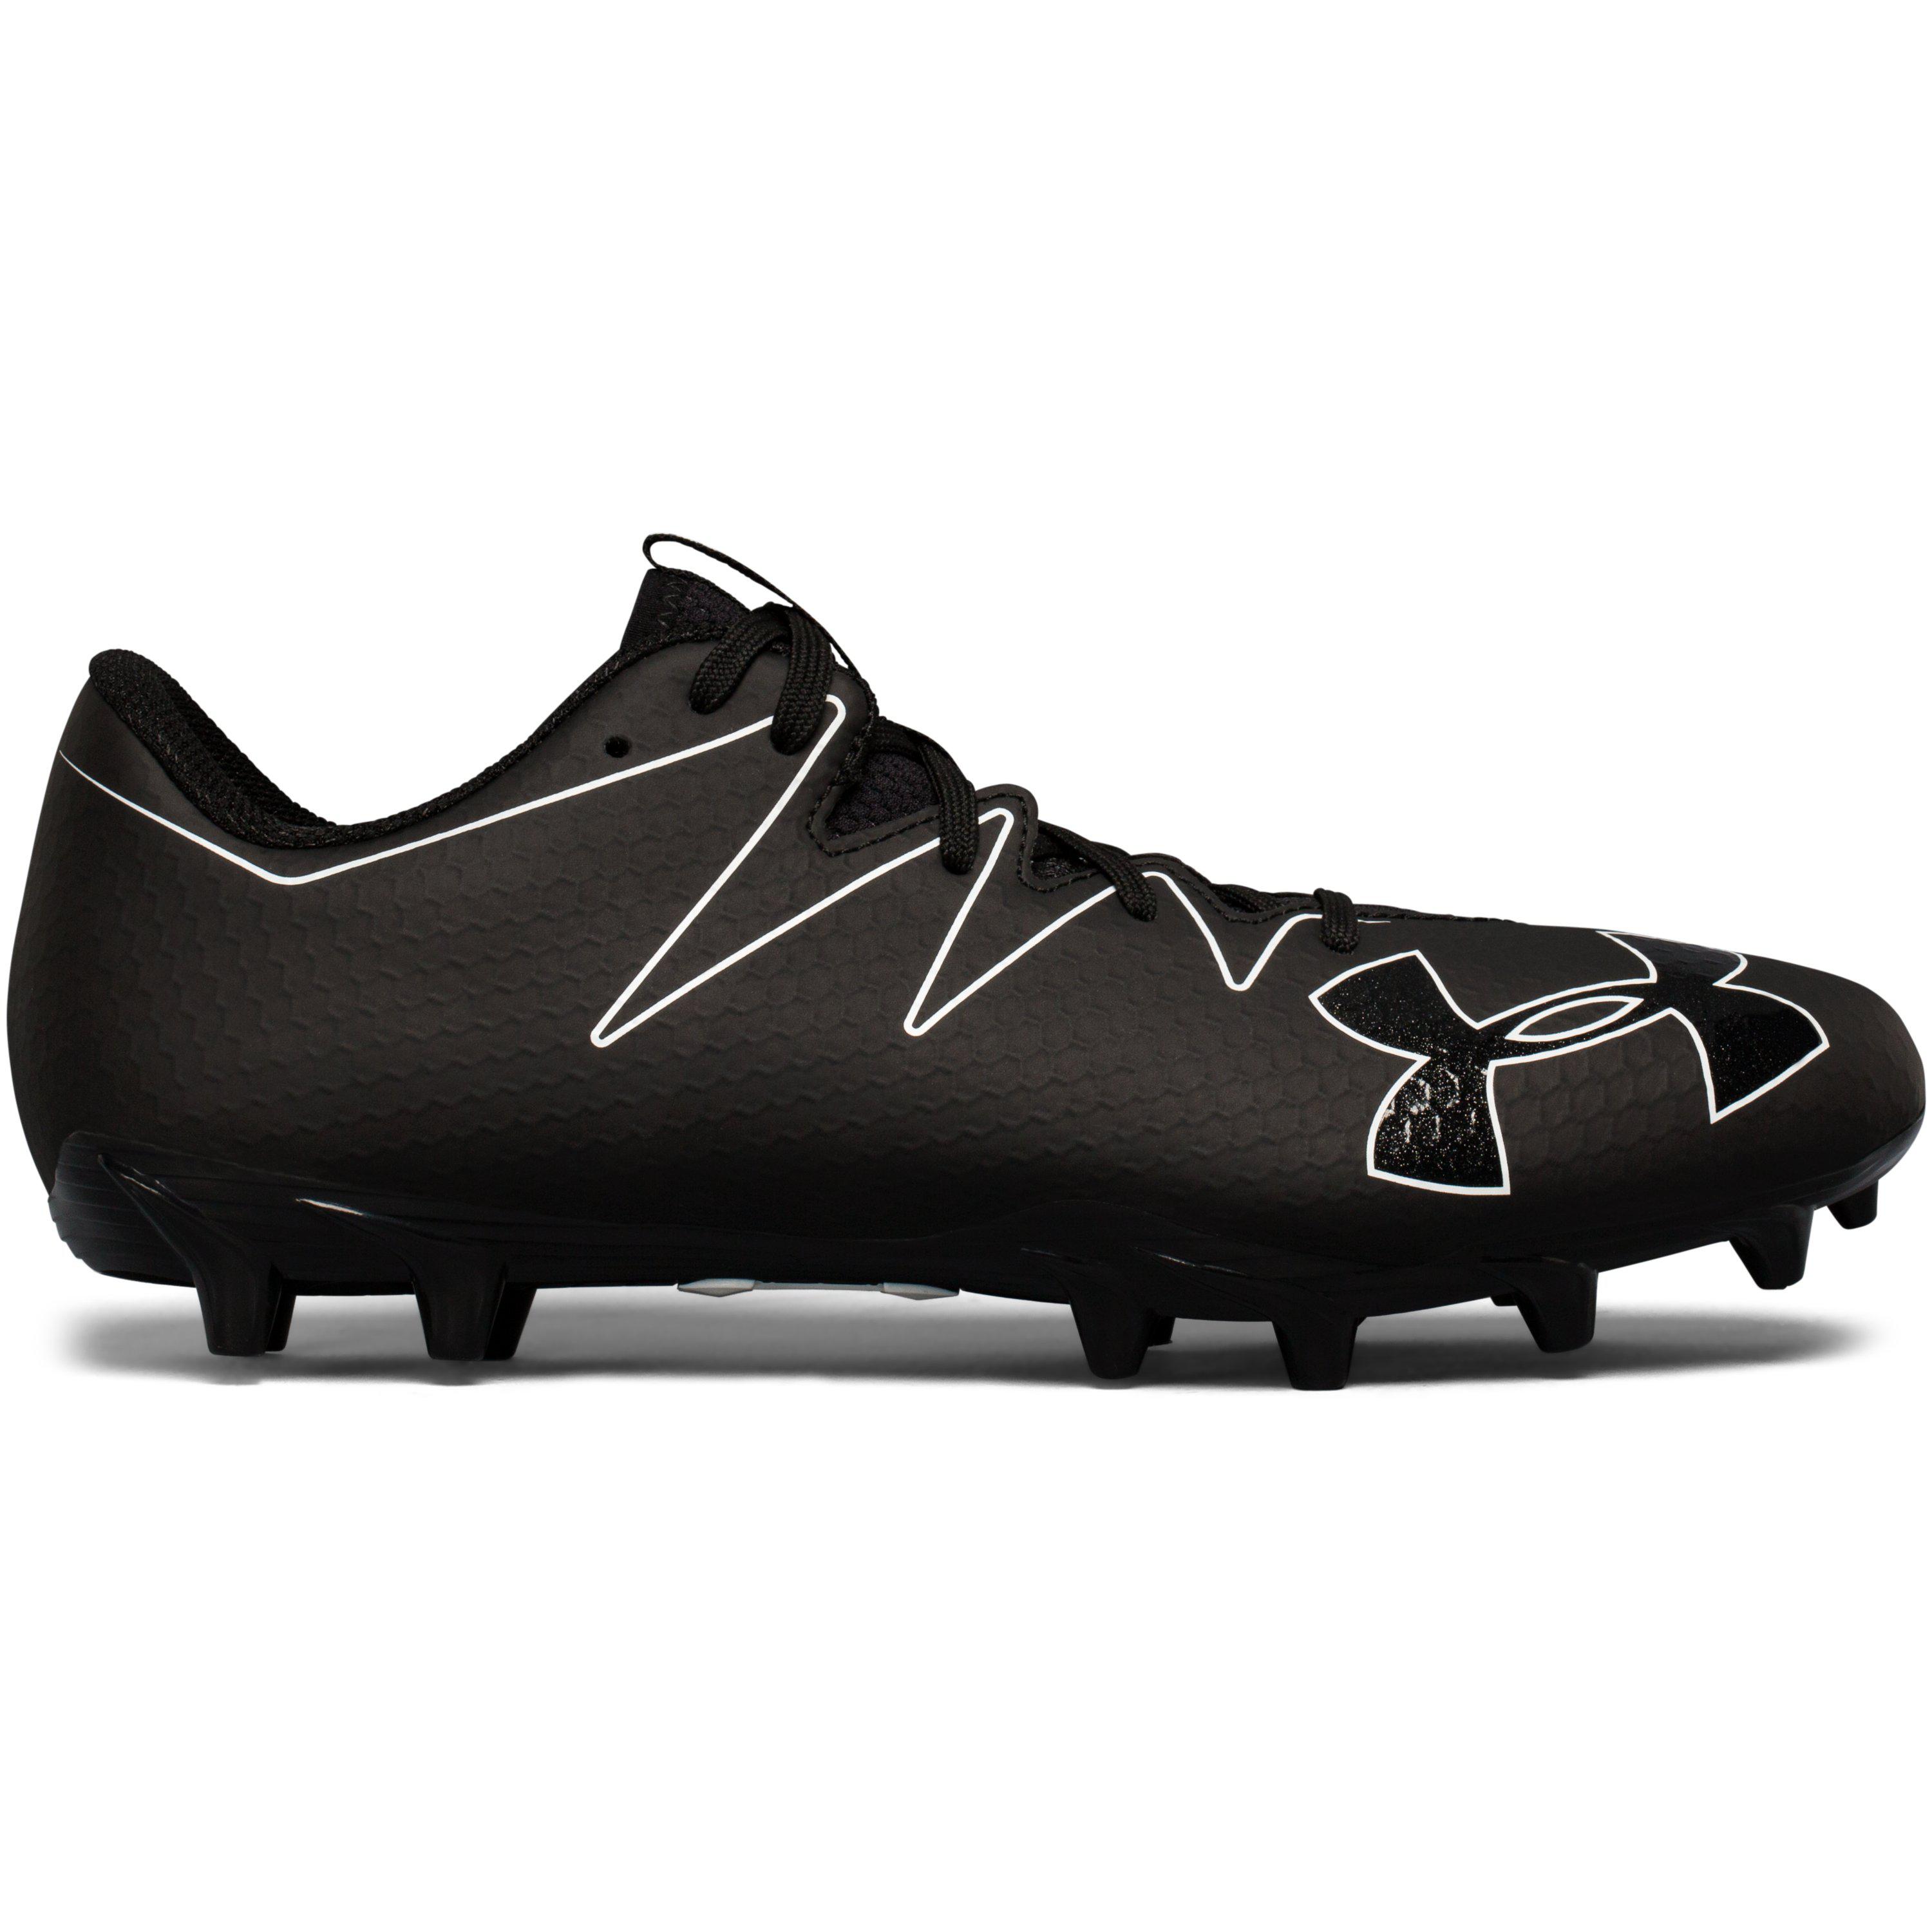 3019992-102 Under Armour Team Nitro Select Low MC Football Cleats AS381 